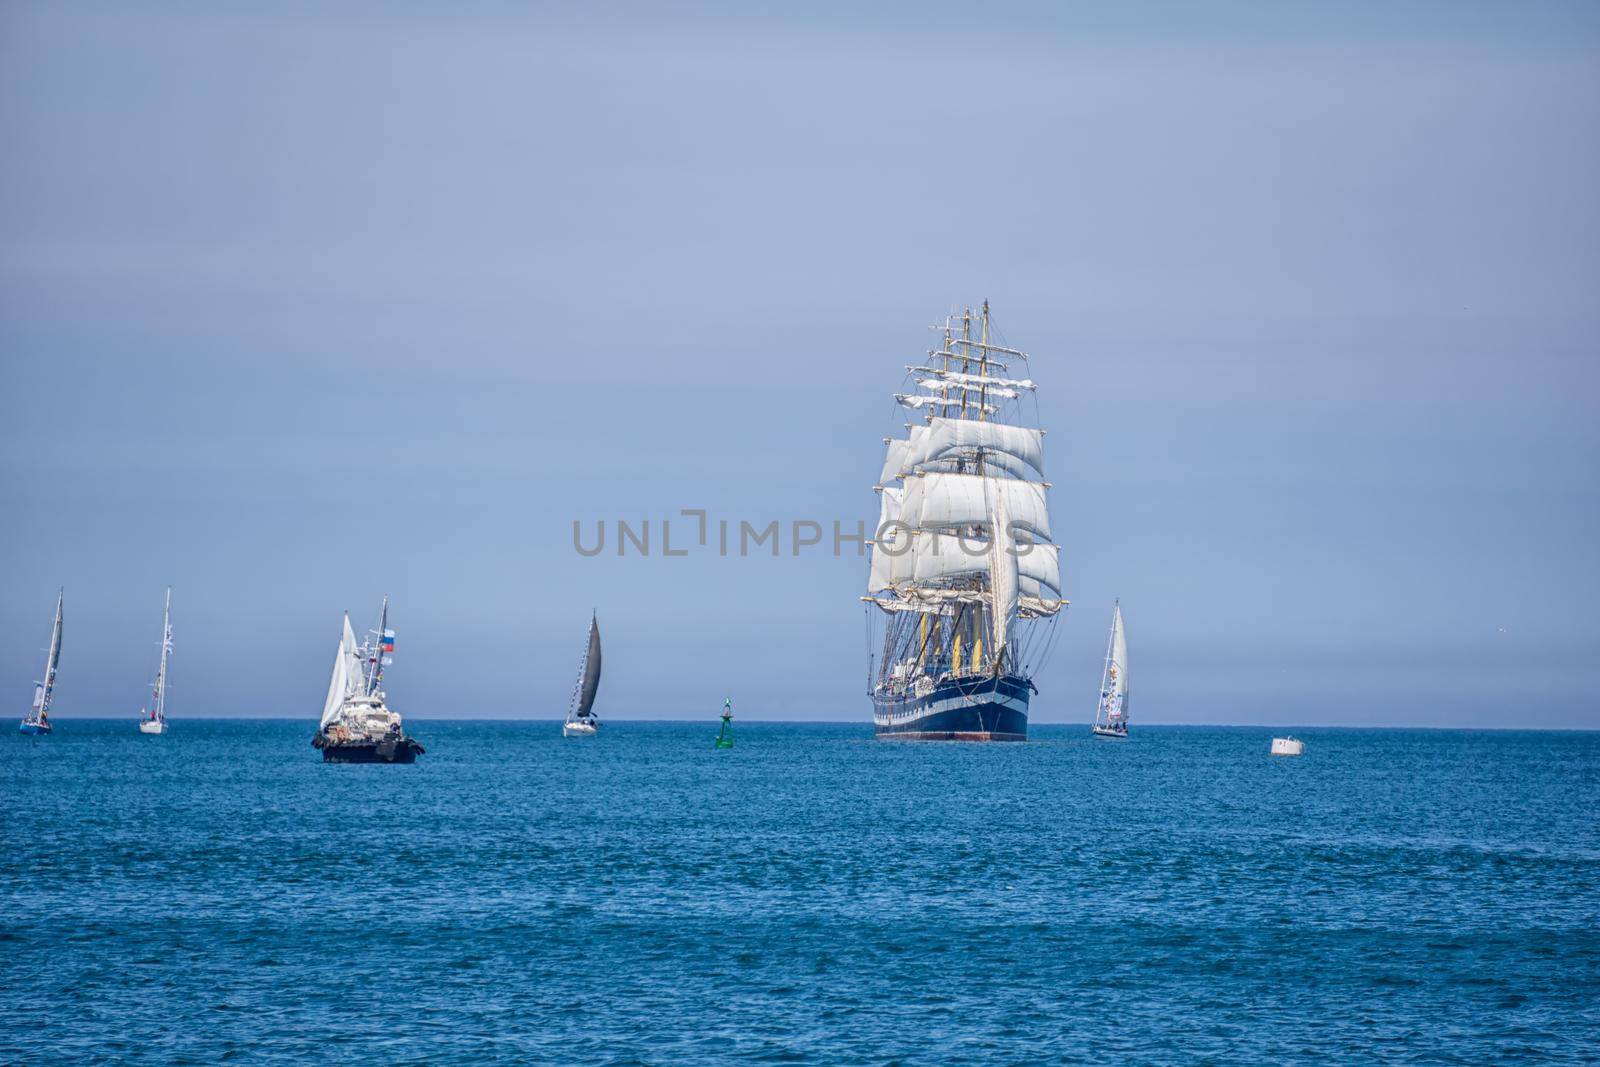 A large ship with white sails sailing on blue water. Nearby are several sailing boats with white sails. by Matiunina